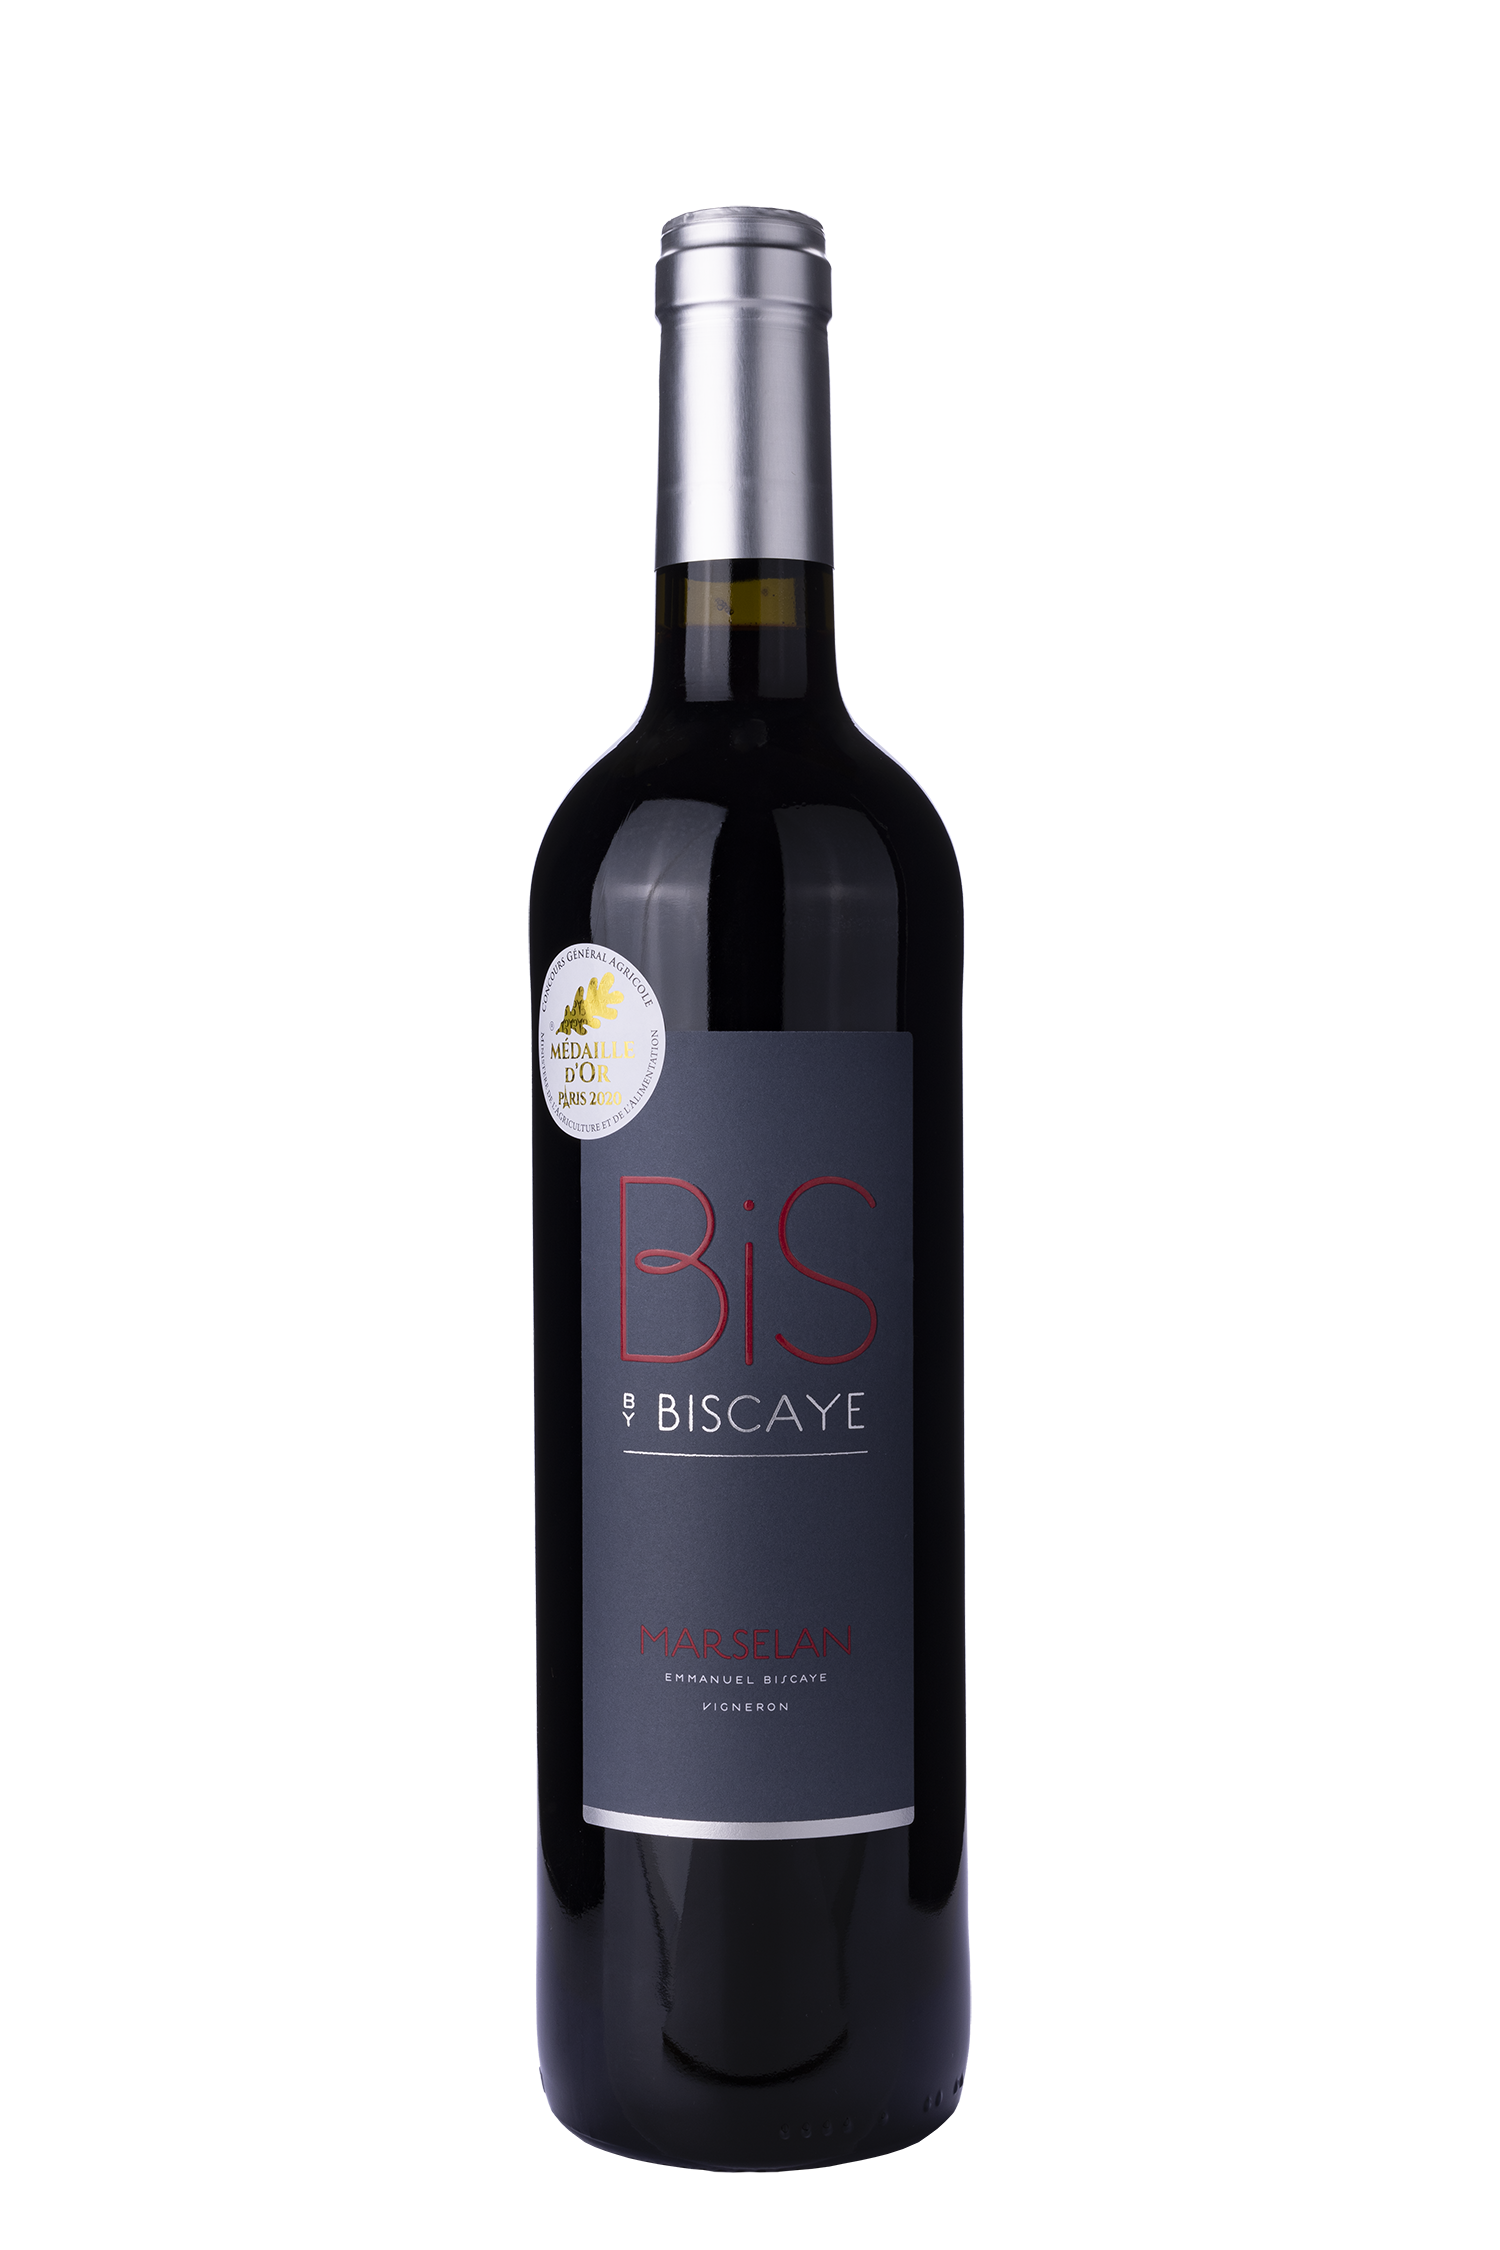 Bis by Biscaye Marselan 2018 - Domaine Scea Biscaye